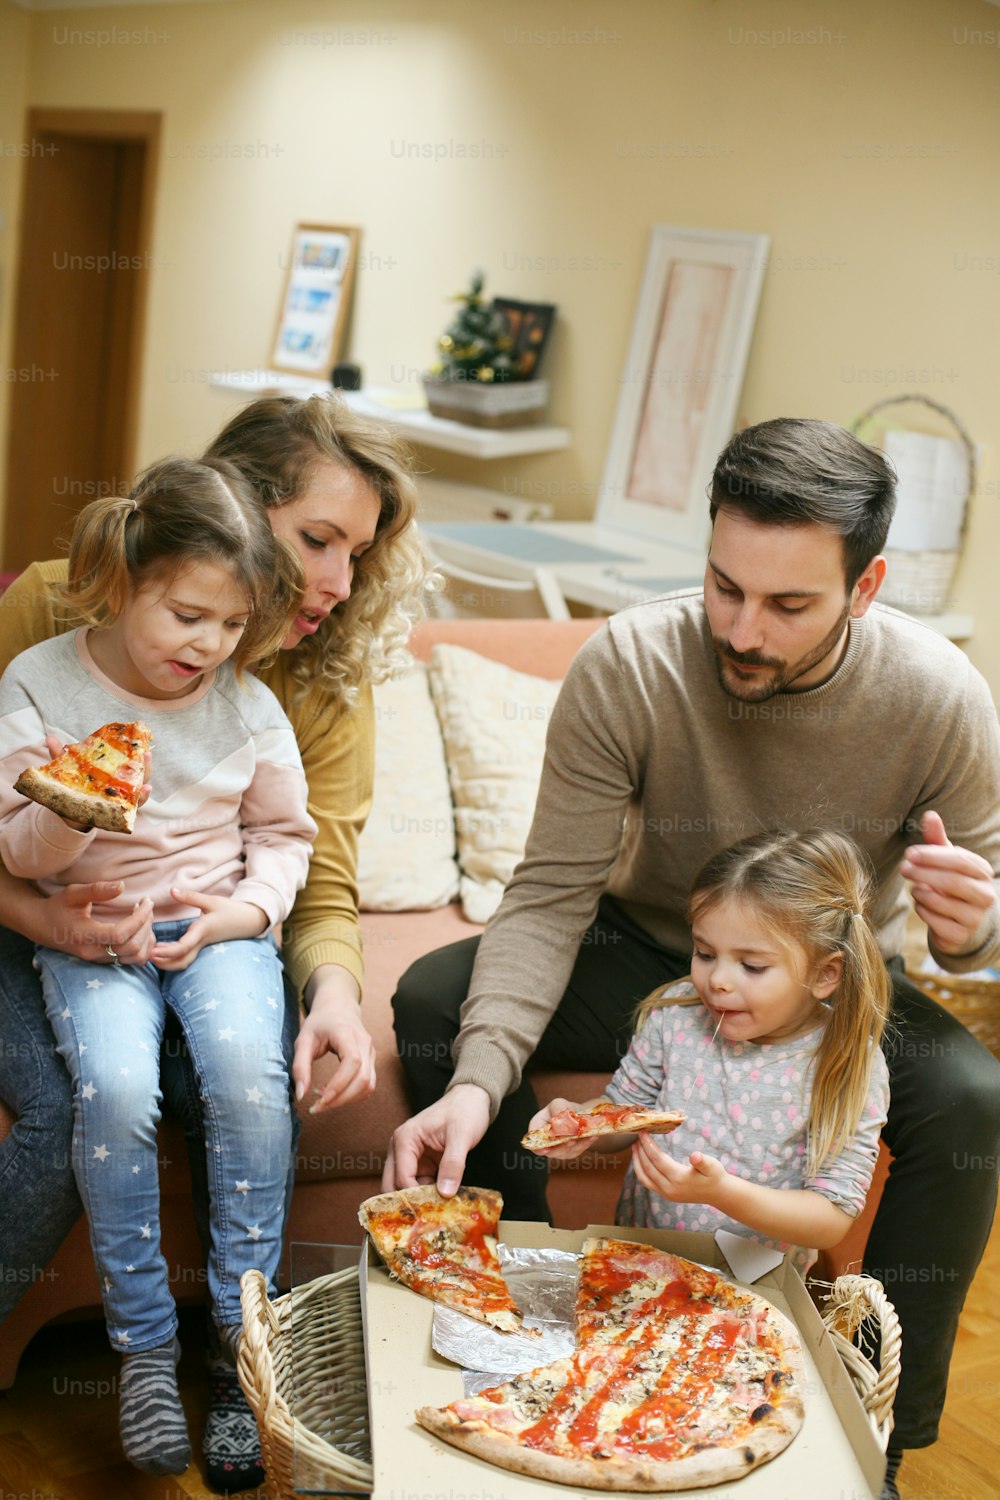 Parents and children eating pizza together. Happy family enjoying in meal together at home.